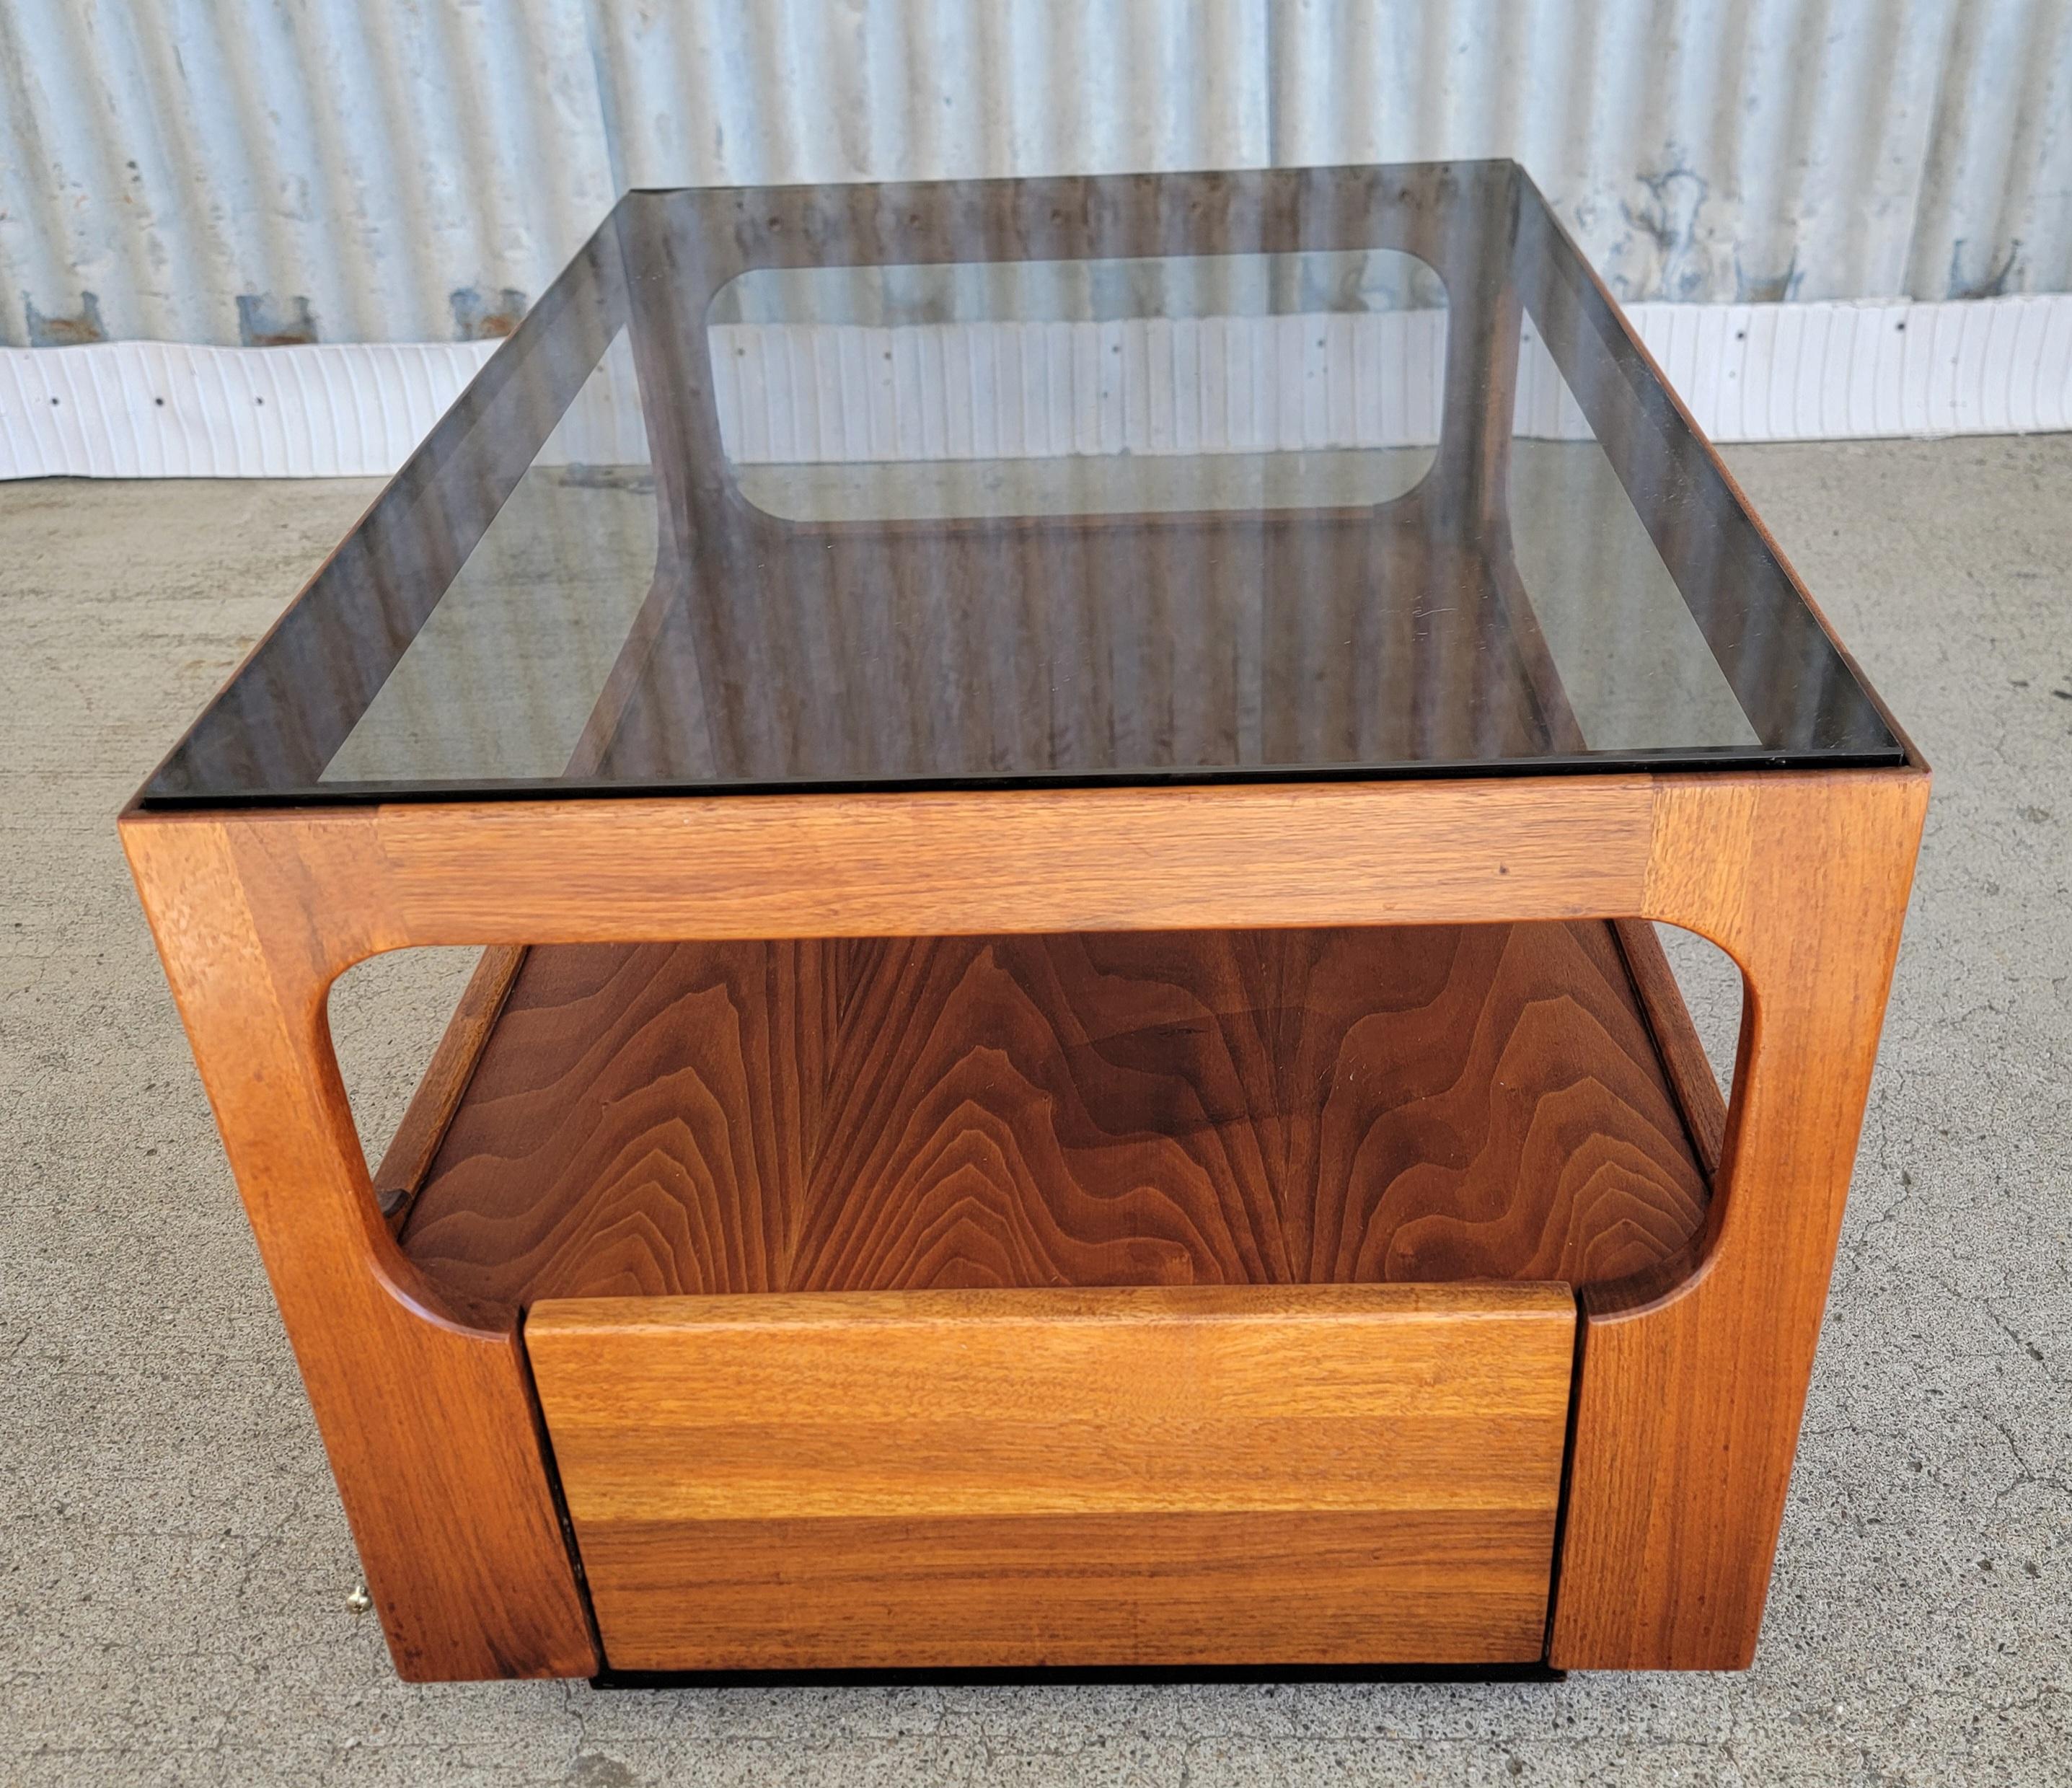 A Mid-Century Modern end or side table crafted in solid walnut with a smoked glass top. Designed by John Keal for Brown Saltman of California, circa. 1960's. Features storage or display under glass top and a single drawer at front of table. Retains